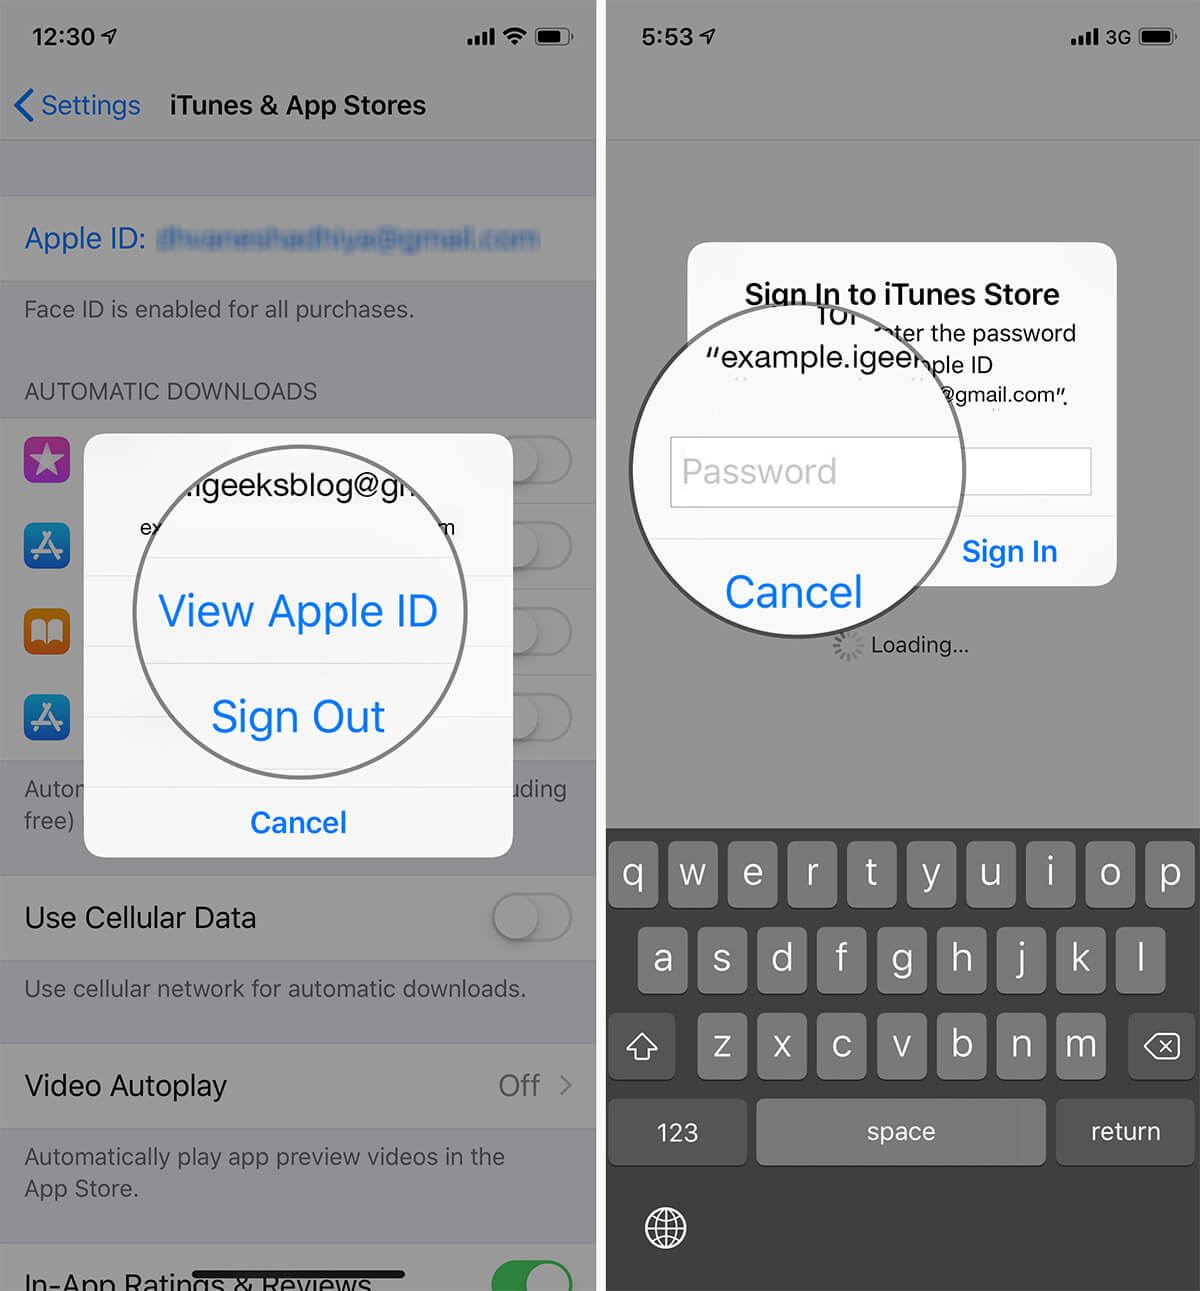 Tap on View Apple ID then authenticate your account in iTunes & App Store Settings